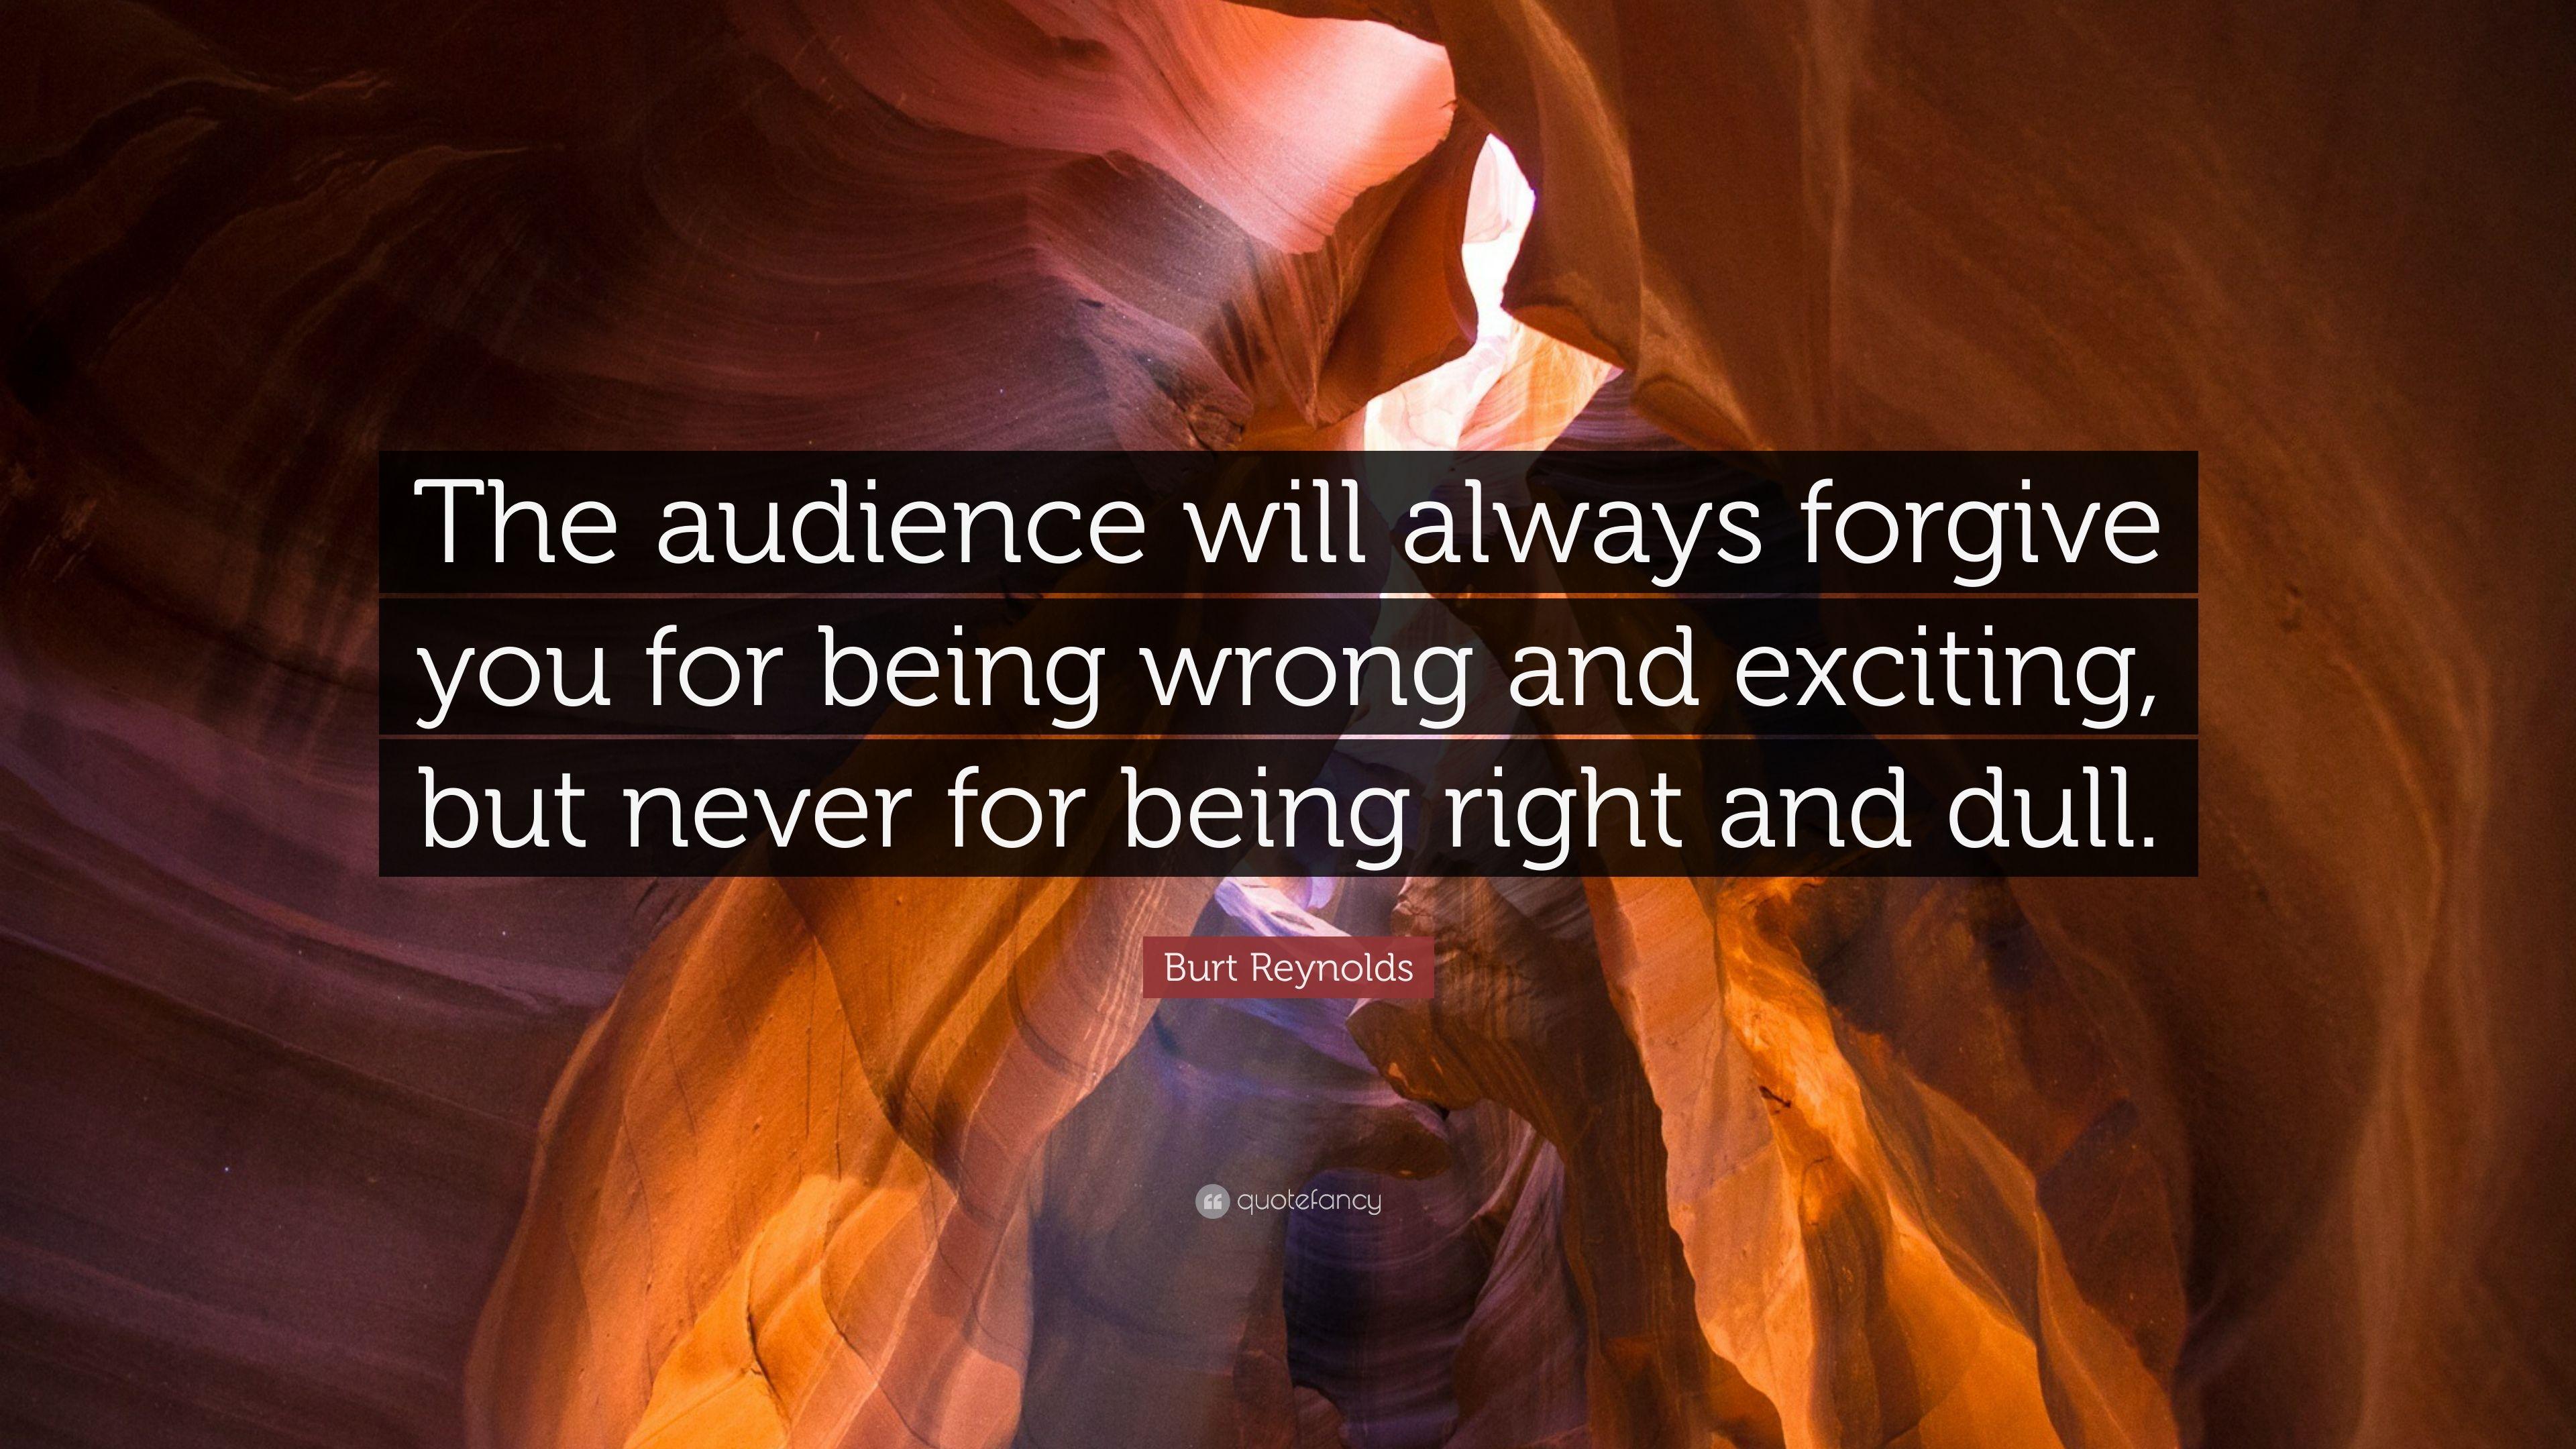 Burt Reynolds Quote: “The audience will always forgive you